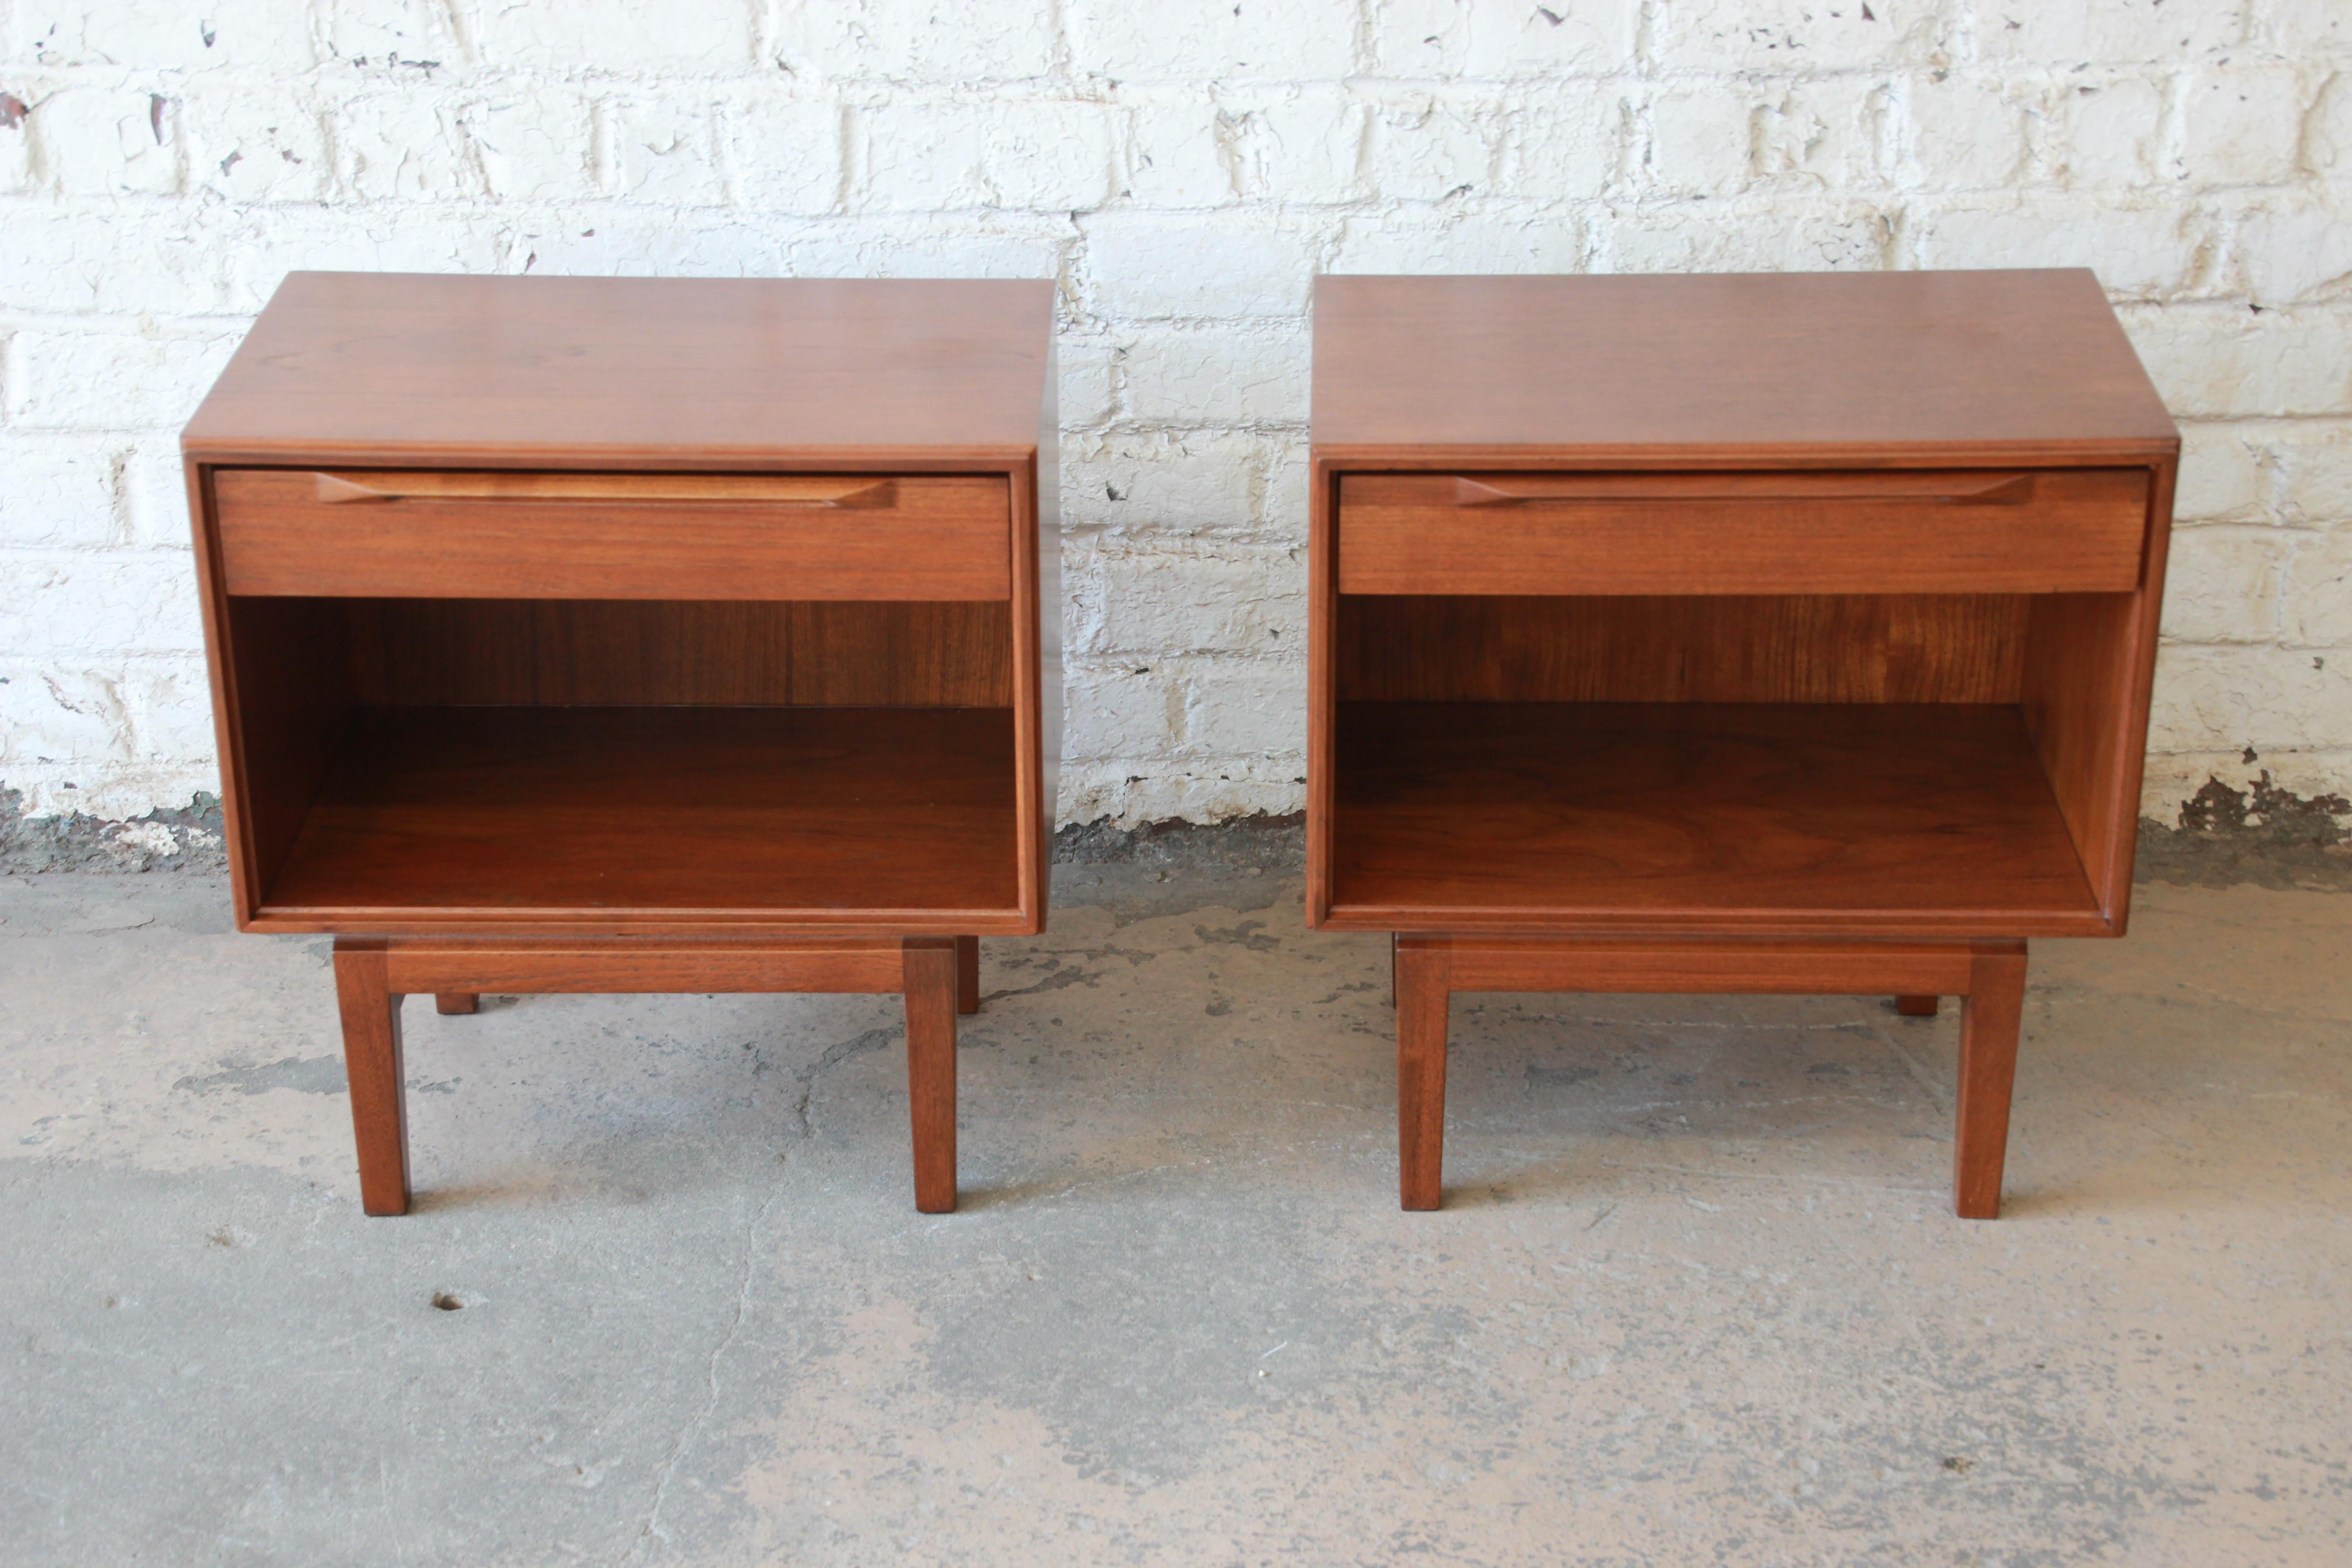 Offering a stunning pair of freshly restored Danish Modern teak nightstands by Ib Kofod-Larsen for Fredericia. The stands have a nice teak wood grain with clean Danish design. There is a drawer with a sculpted pull for storage and cabinet space